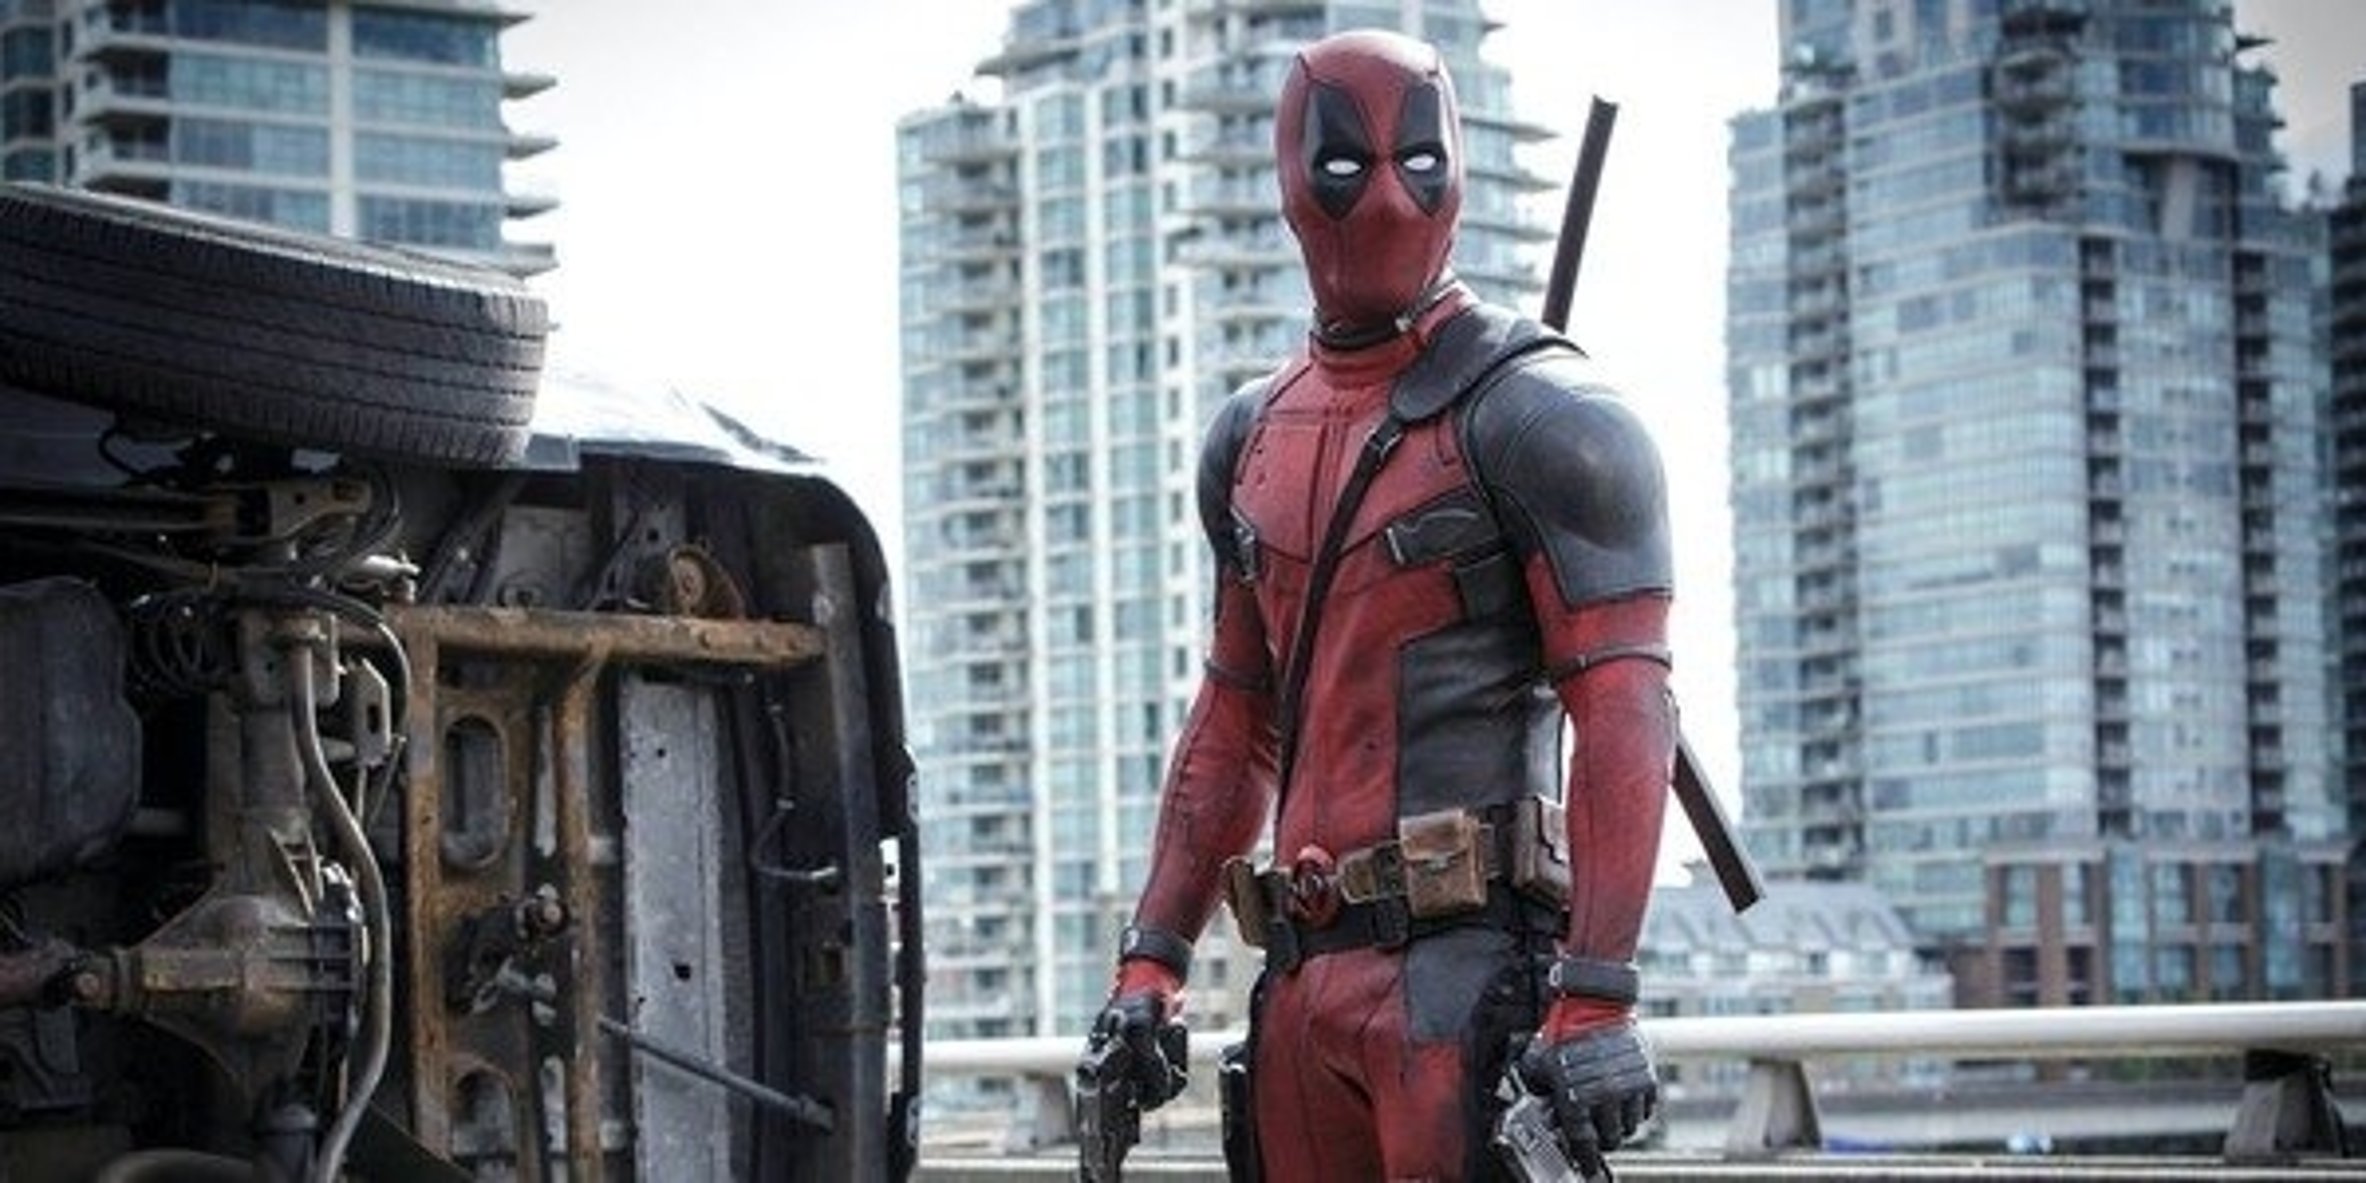 Ryan Reynolds Shares Update On When Deadpool 3 Will Likely Start Filming